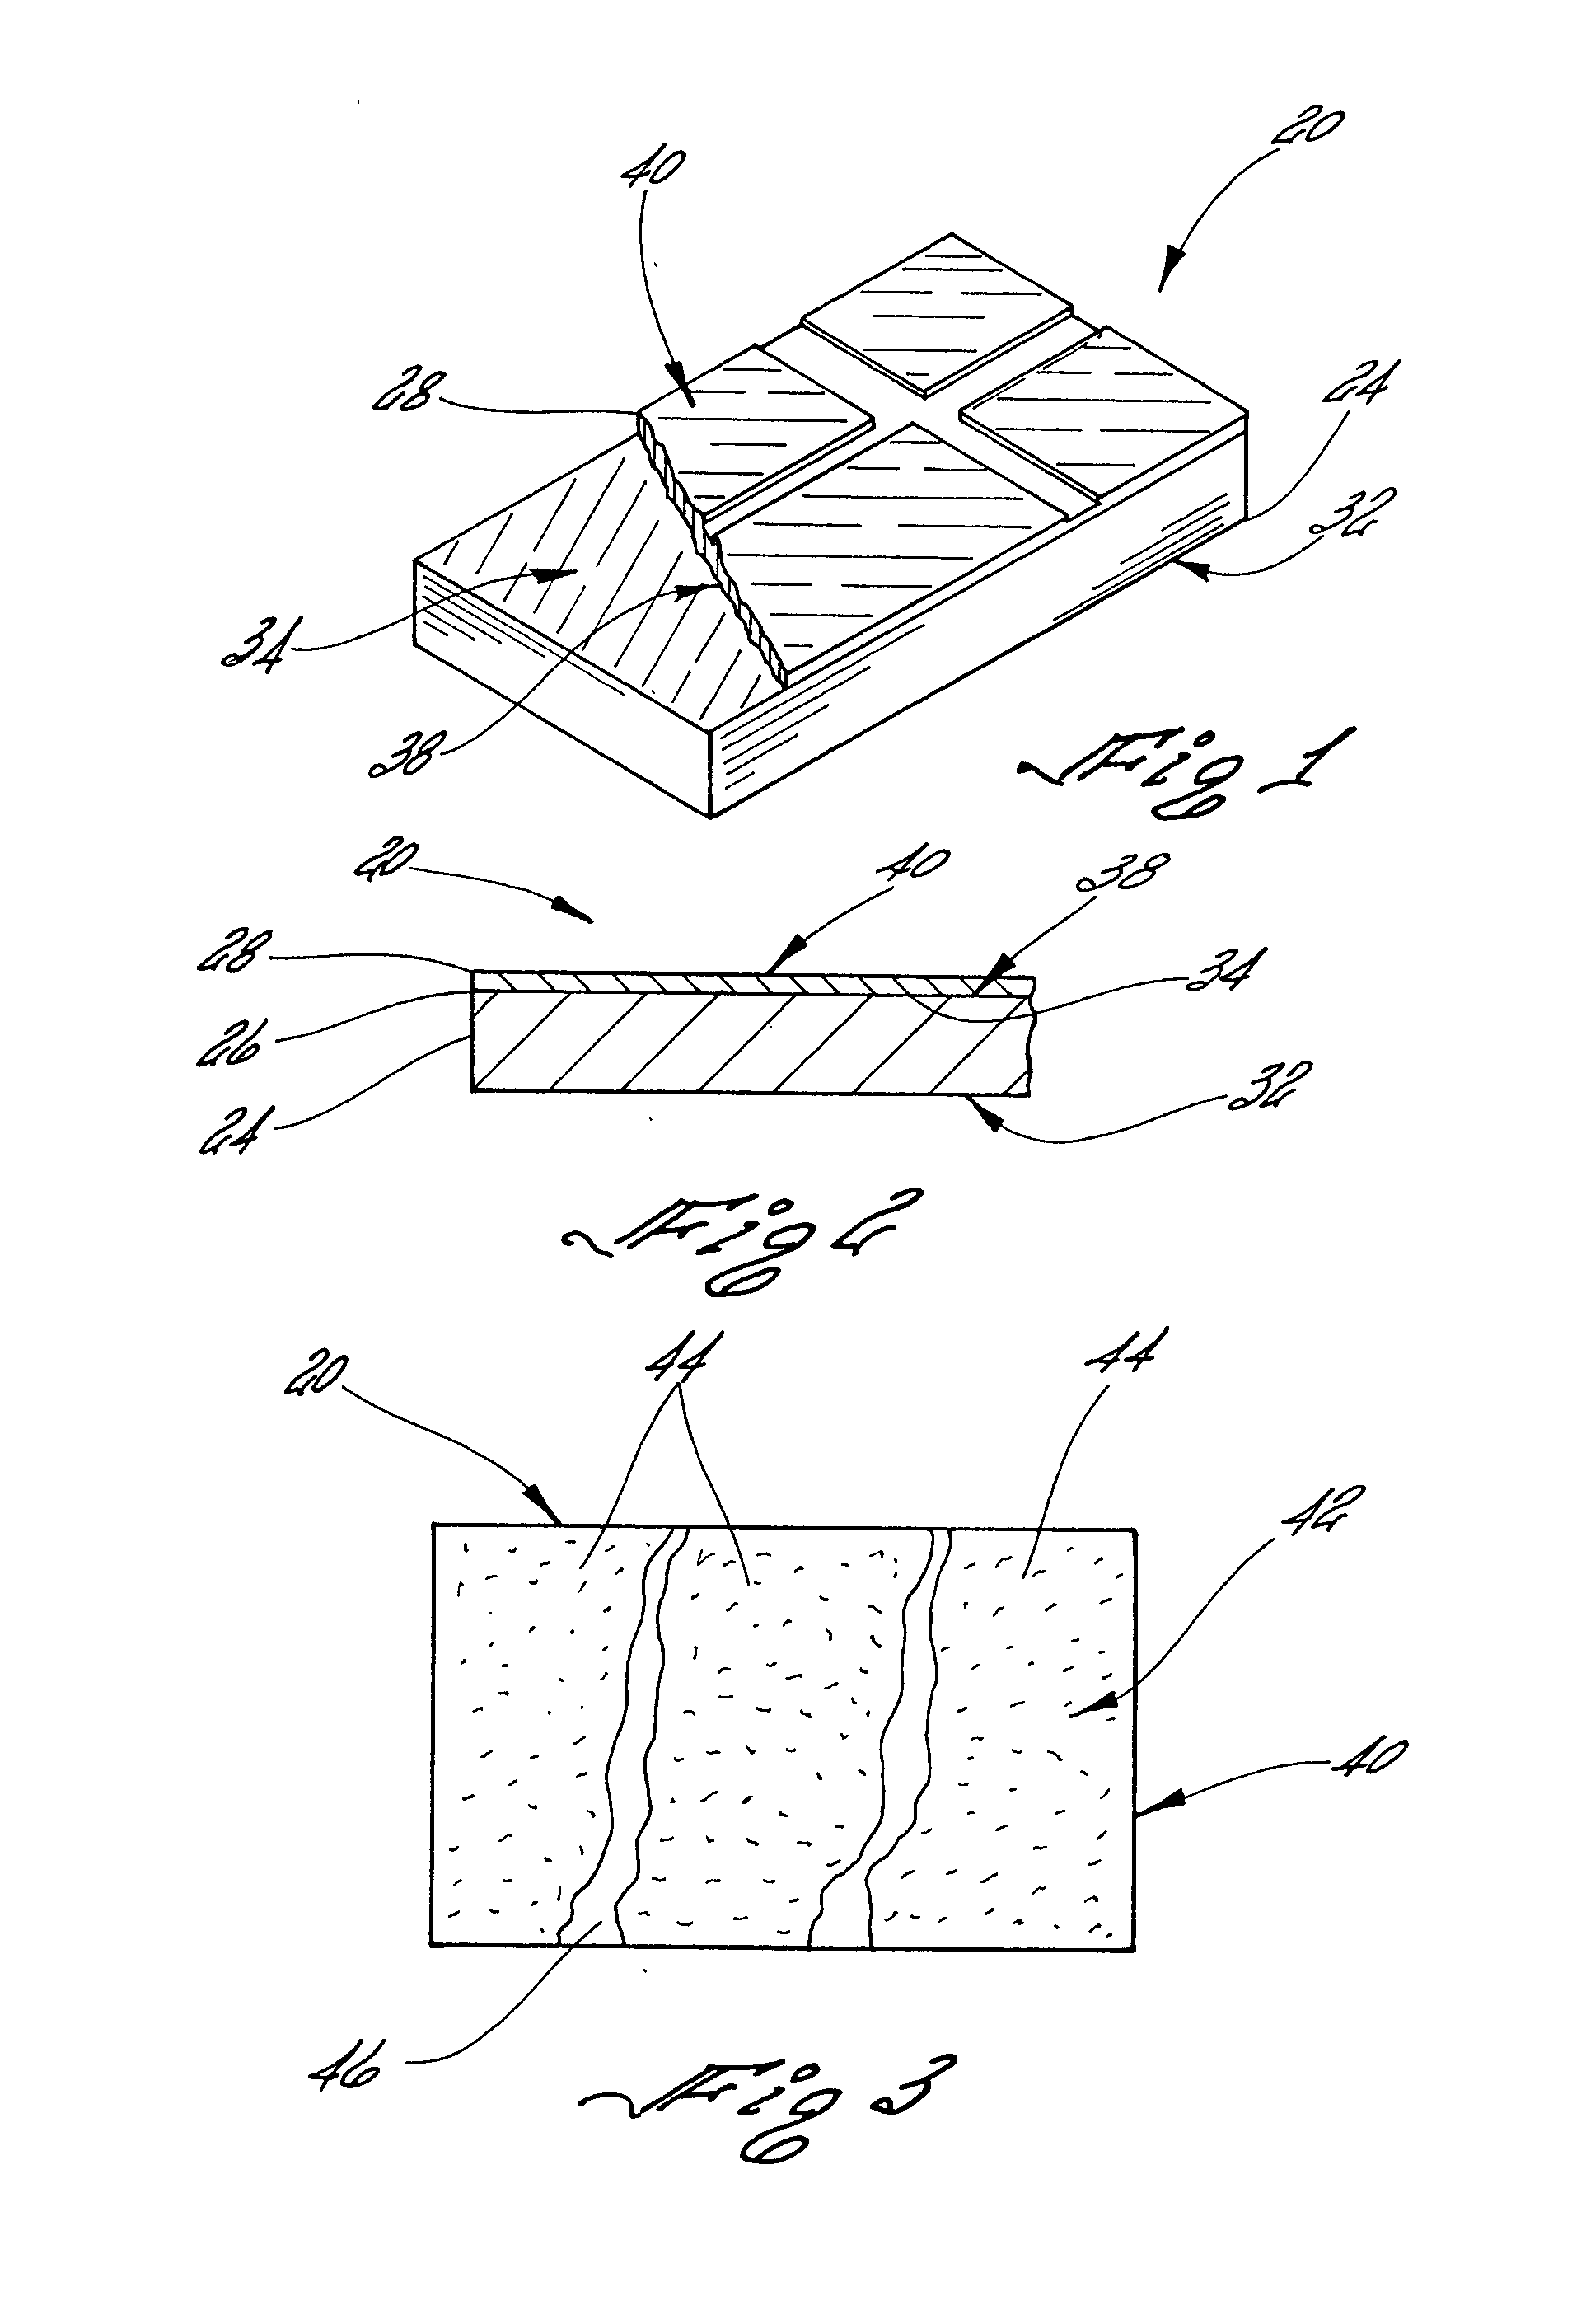 Decorative structures, decorative panels and method of making same